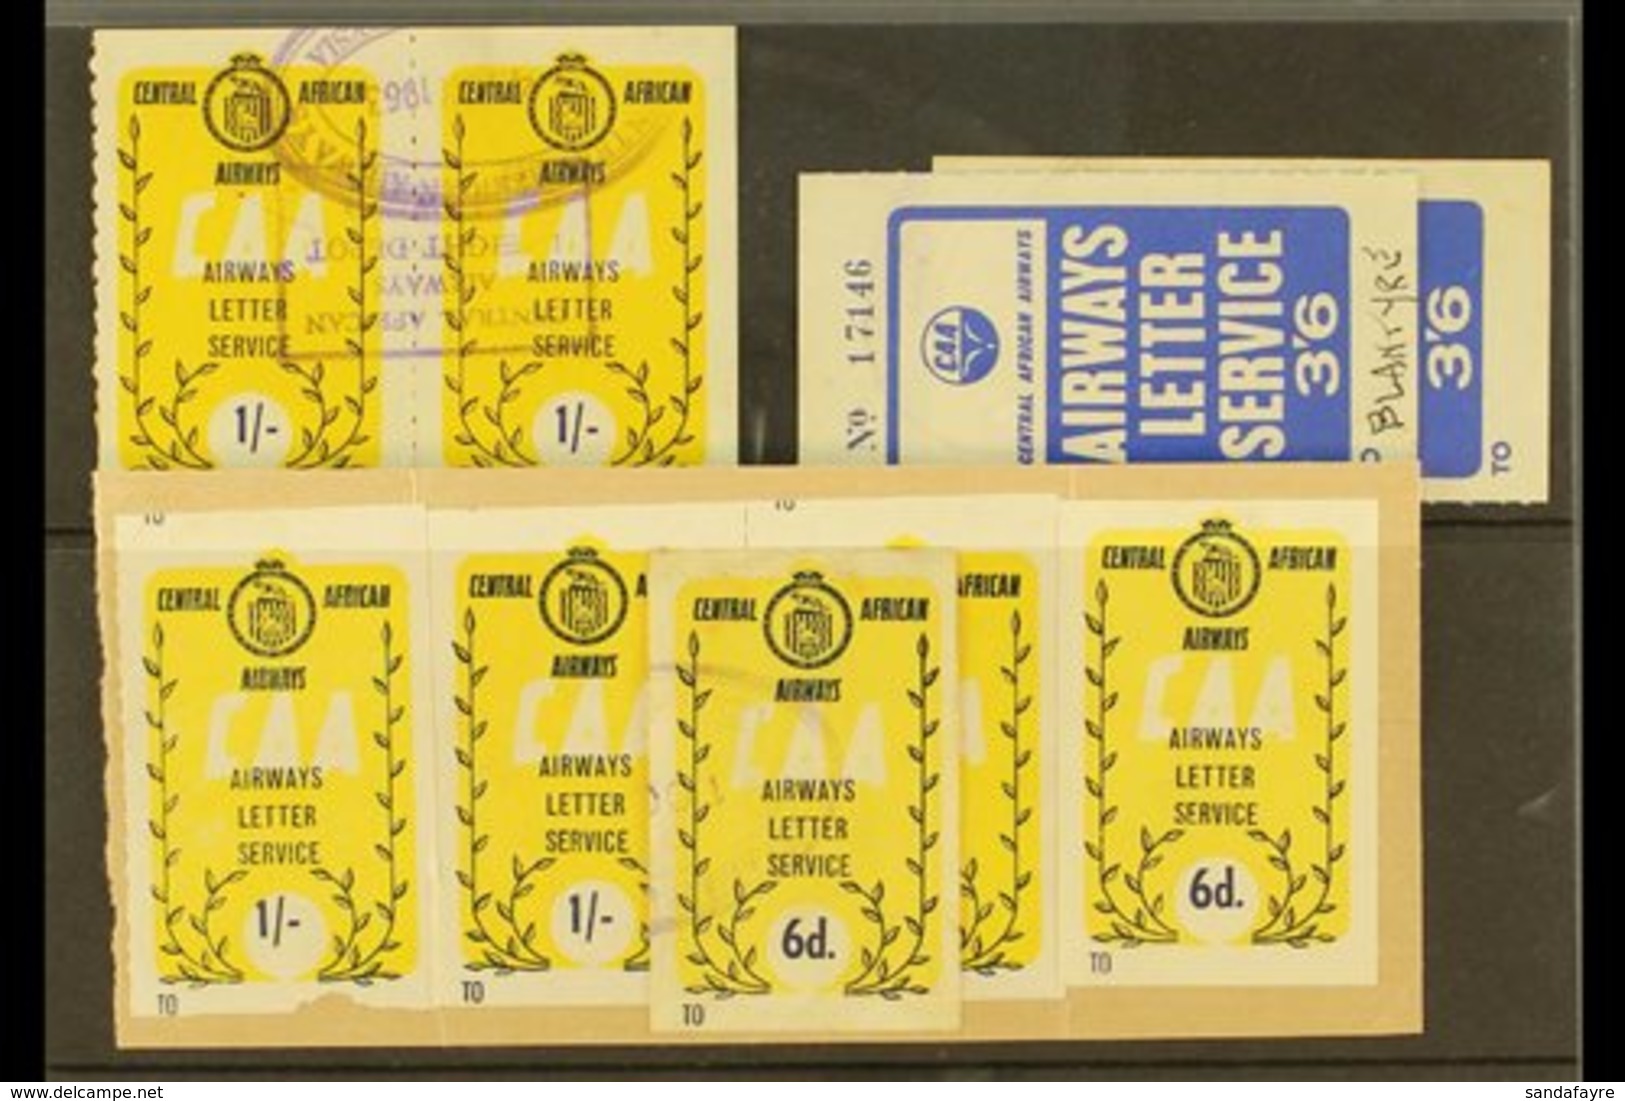 CENTRAL AFRICAN AIRWAYS Airways Letter Service Labels Group Incl. Blue On Yellow 6d & 1s Values, Plus 3s6d Blue Labels,  - Rhodesia & Nyasaland (1954-1963)